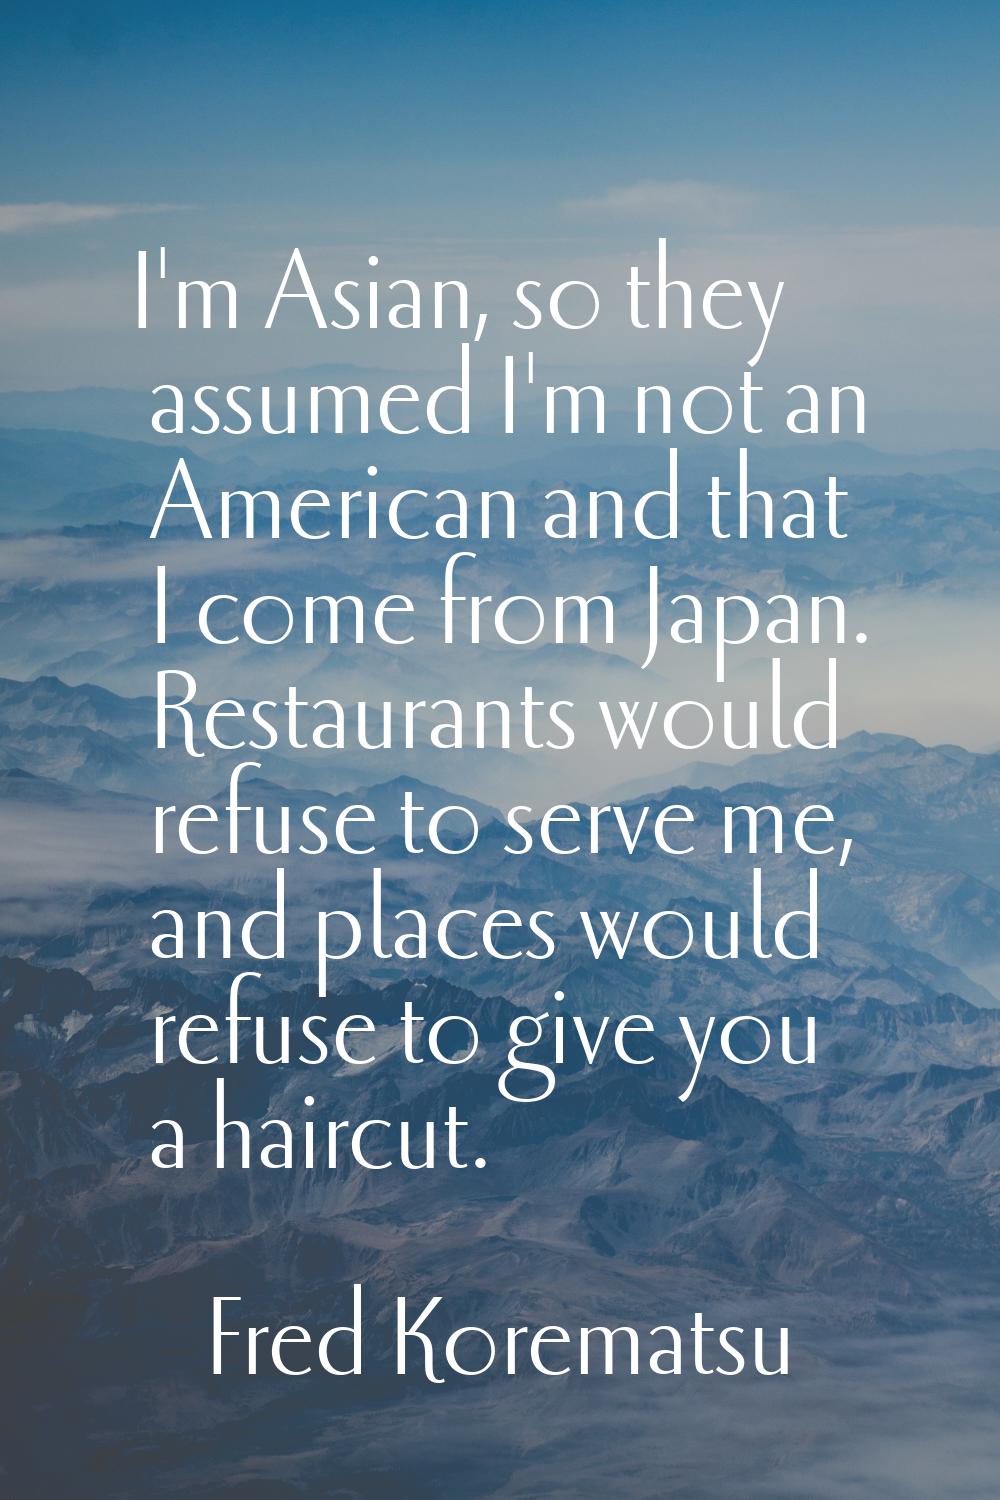 I'm Asian, so they assumed I'm not an American and that I come from Japan. Restaurants would refuse